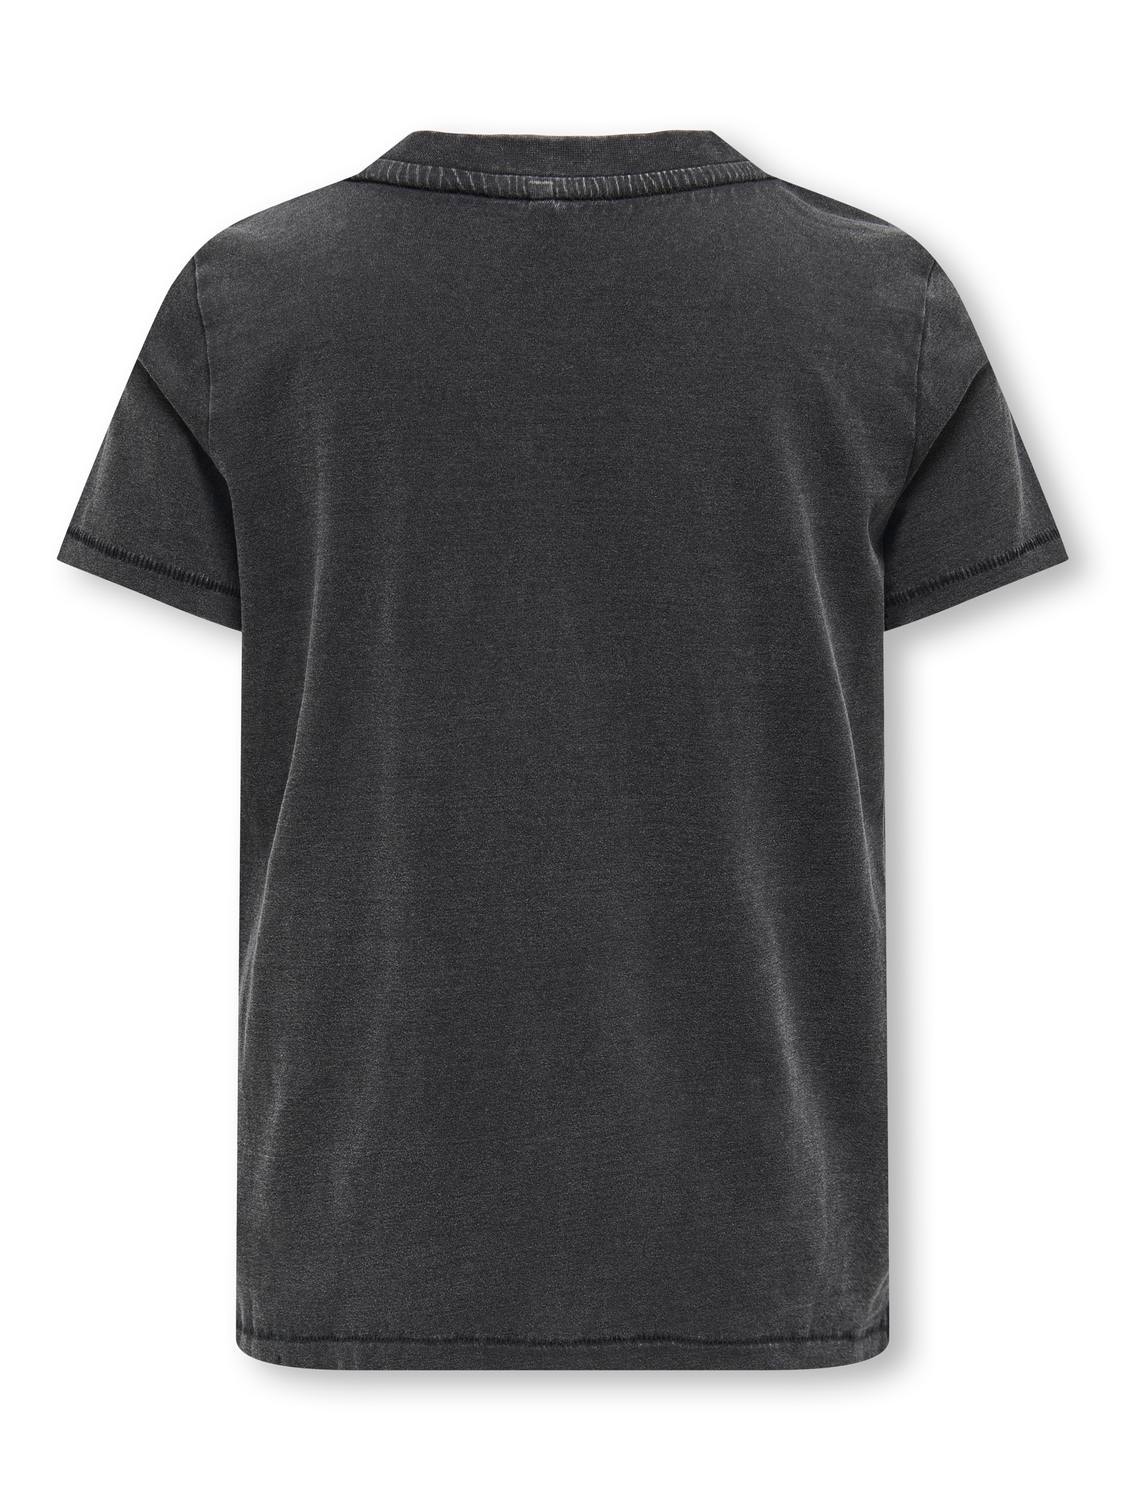 ONLY Box Fit Round Neck T-Shirt -Jet Black - 15331149